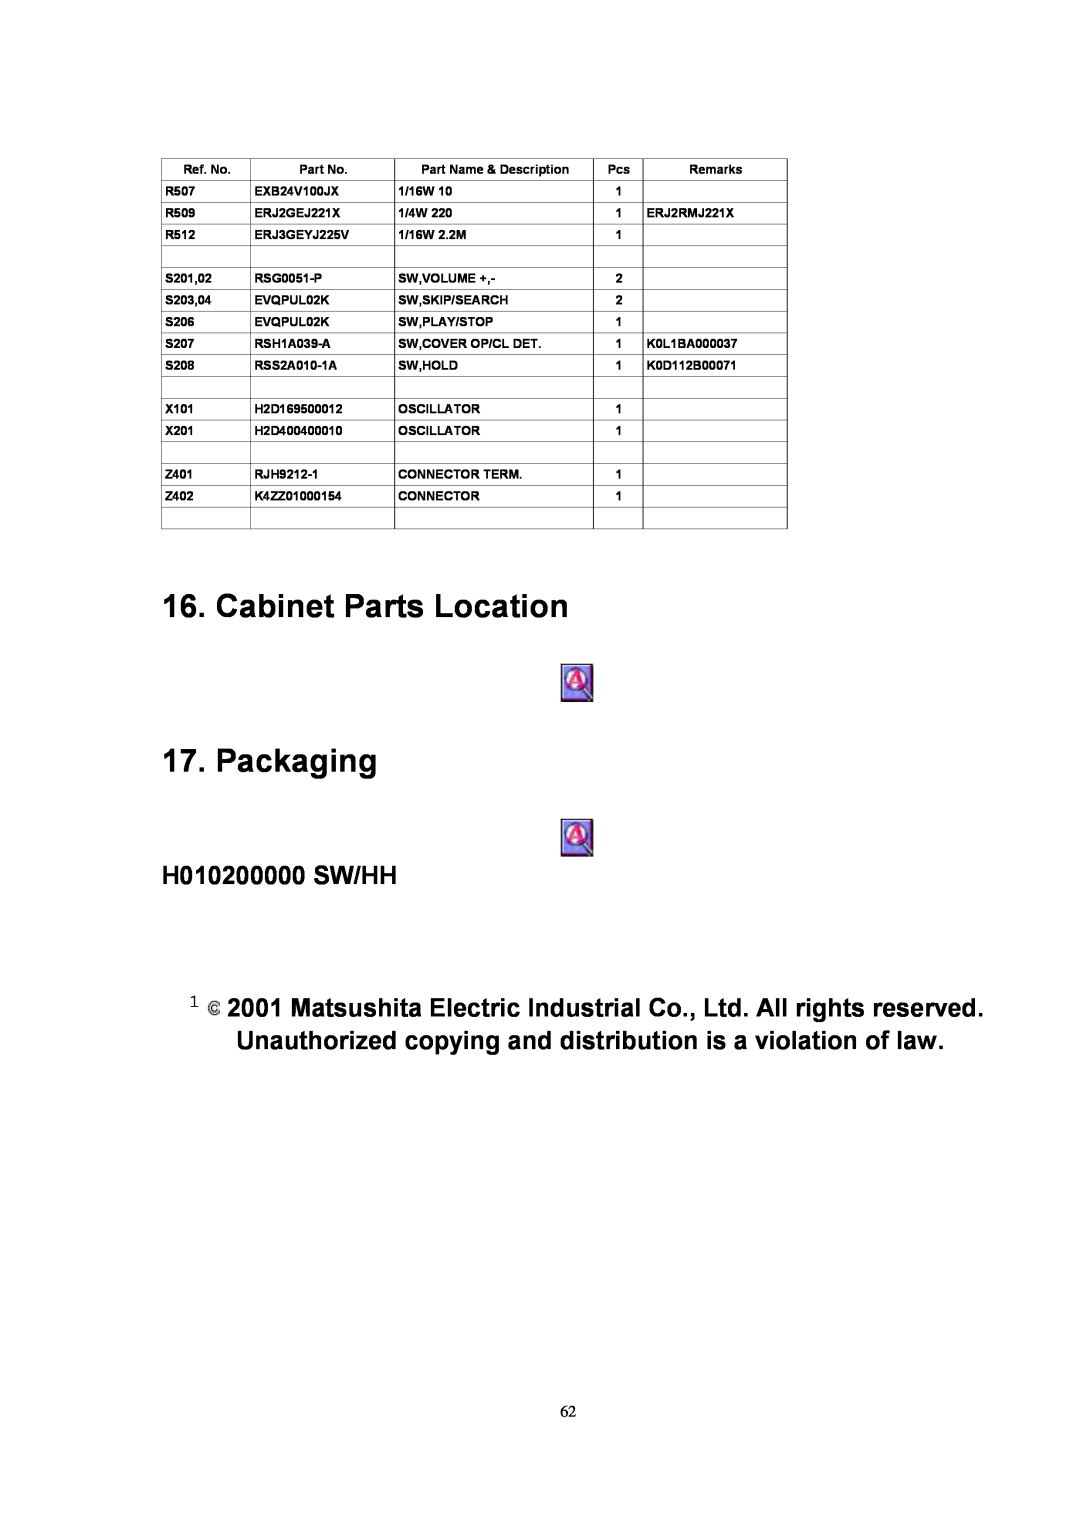 Panasonic SJ-MJ88 manual Cabinet Parts Location 17.Packaging, H010200000 SW/HH 